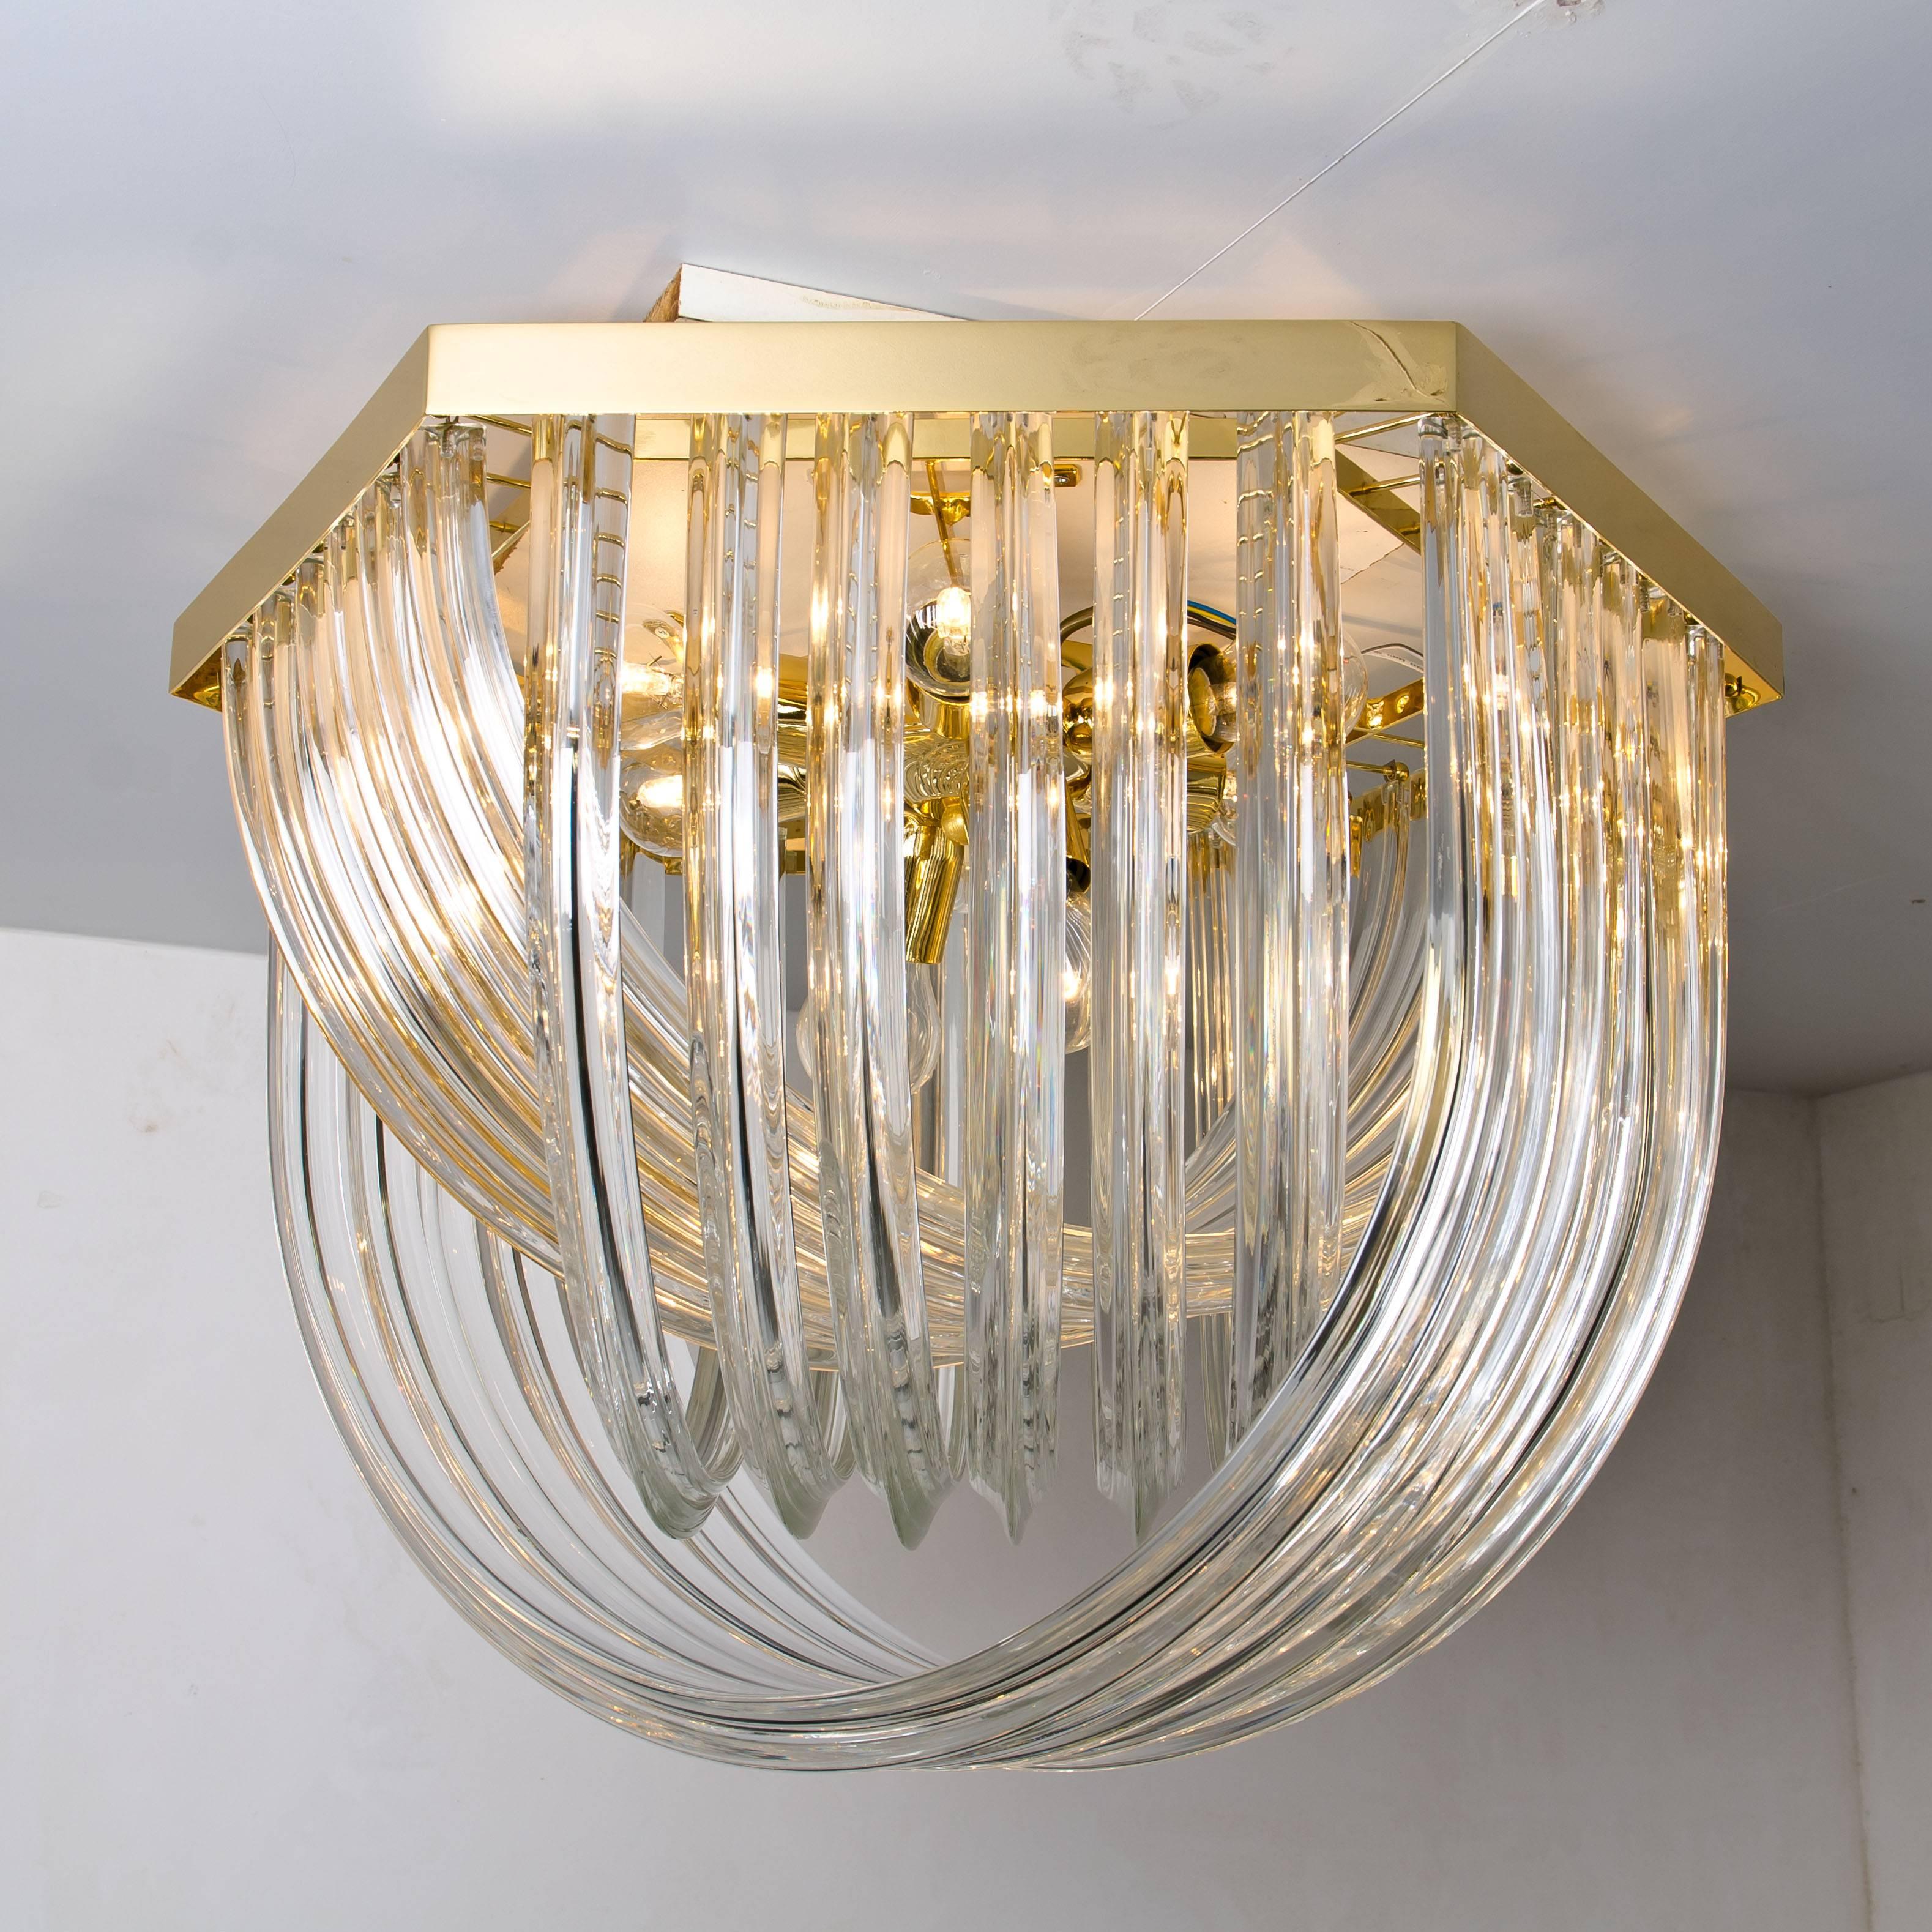 A huge and impressive Venini flush mount chandelier, curved crystal glass and gilt brass, Italy

The chandelier is made of curved crystal Murano glasses in different lengths. The flush mount has eight lights with 18 Murano crystal tubes and a